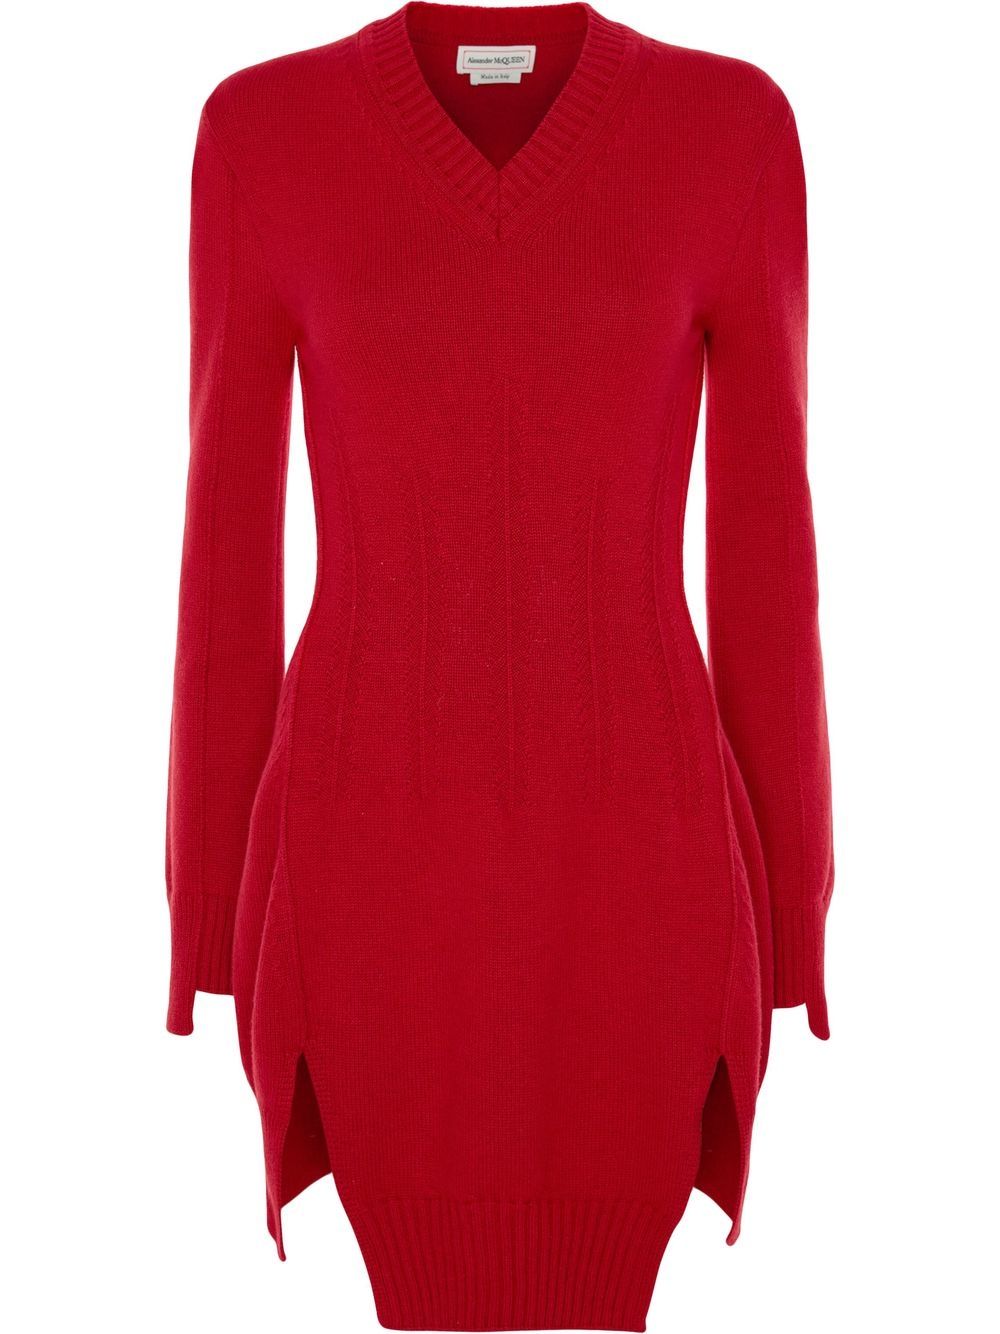 Image 1 of Alexander McQueen knitted tunic jumper